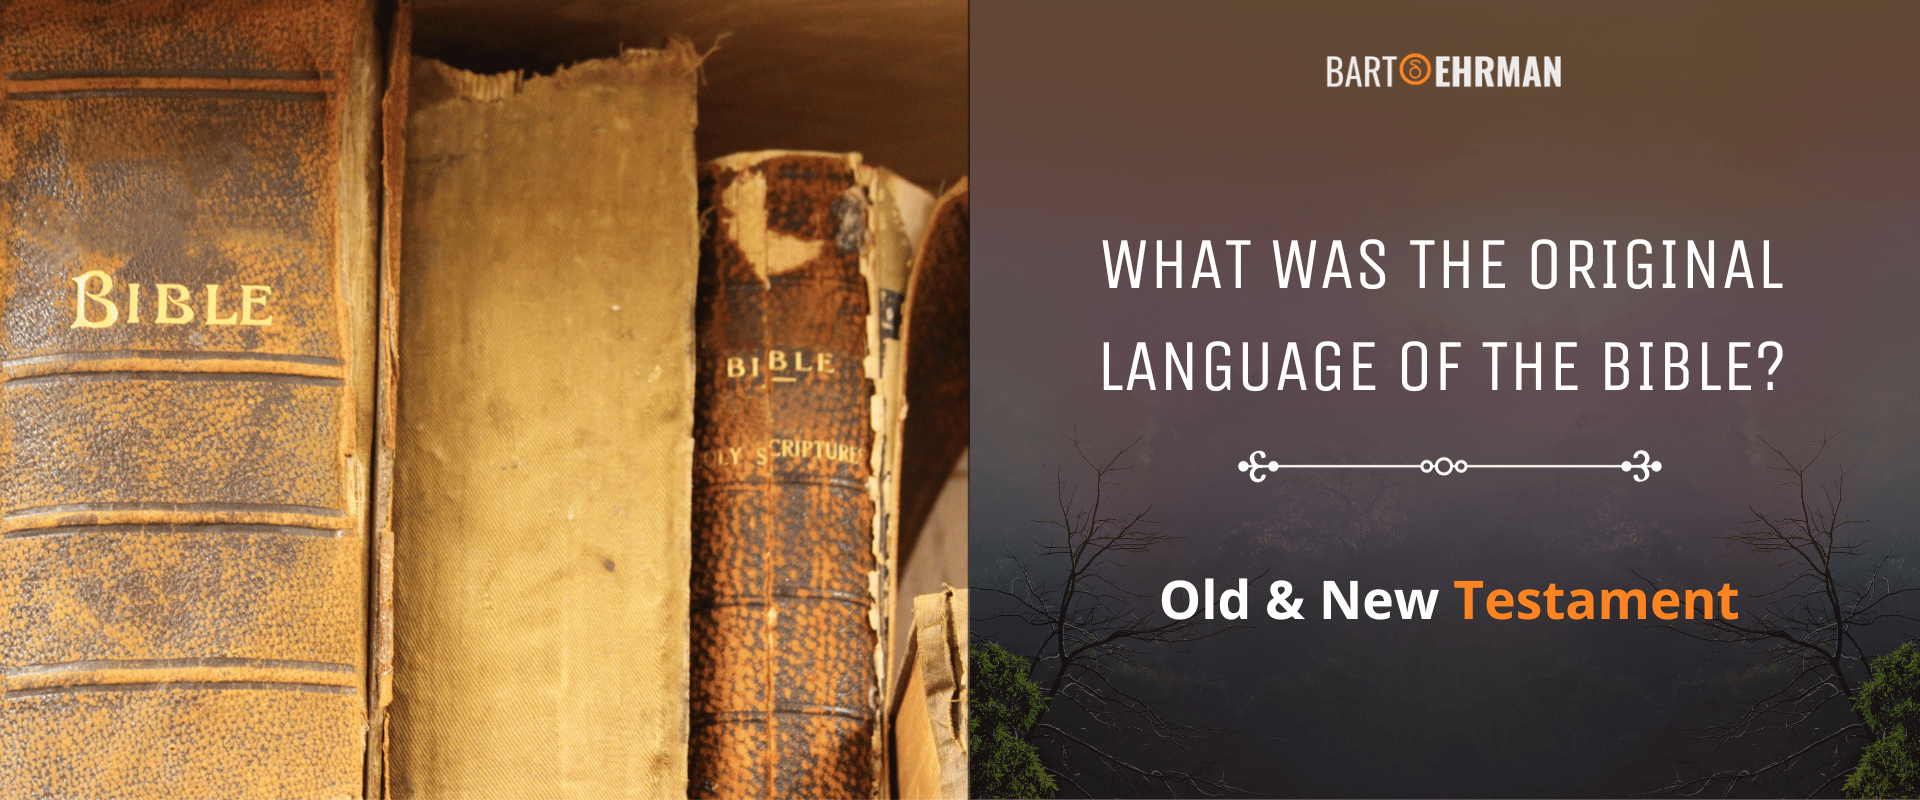 What Was the Original Language of the Bible